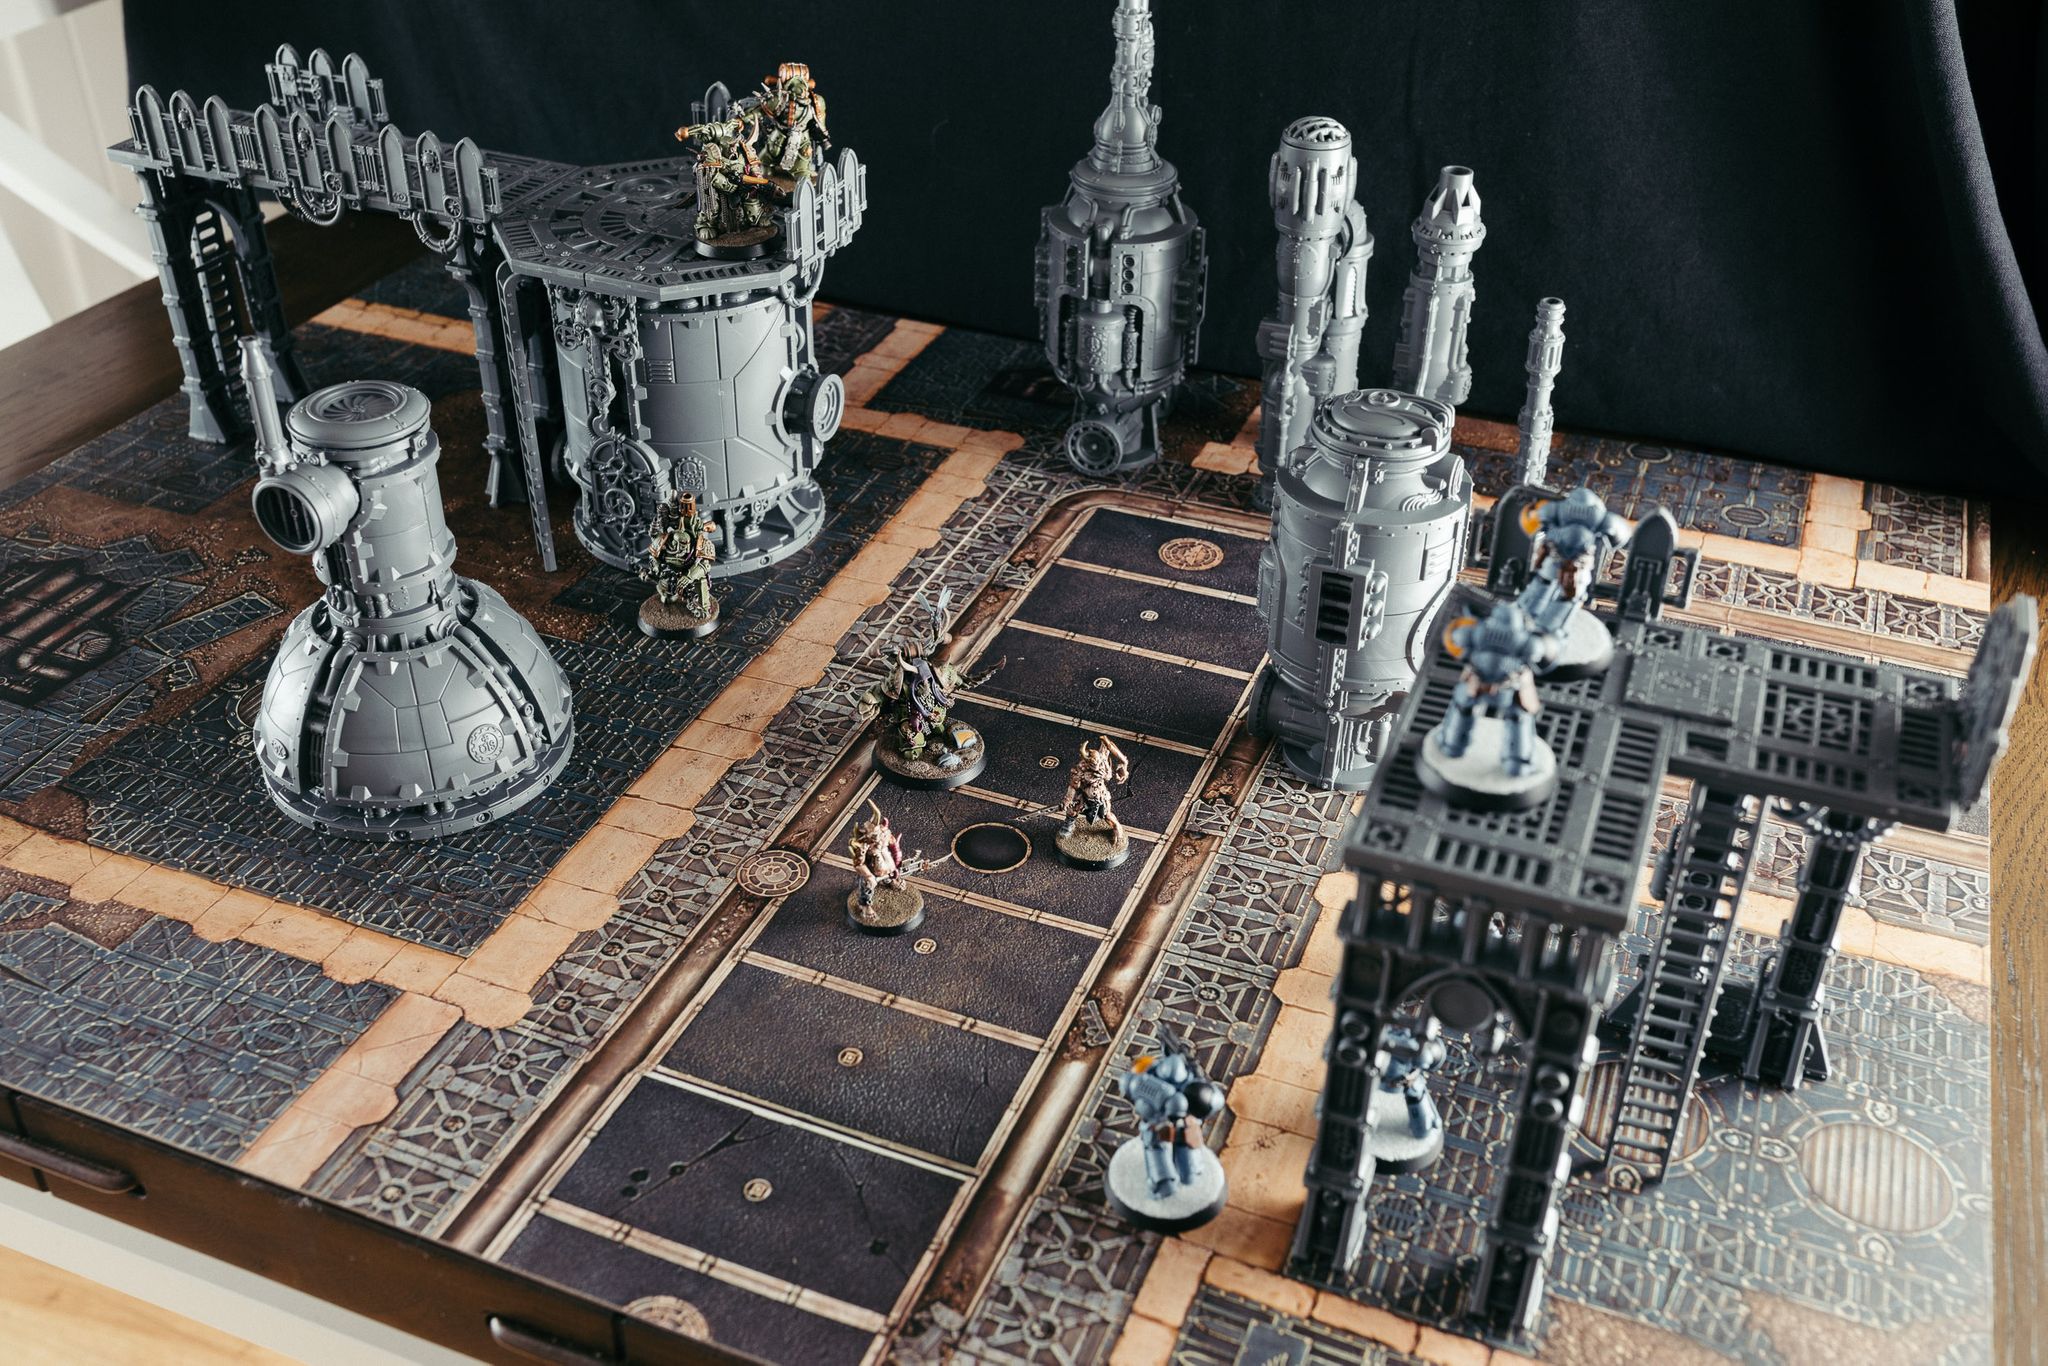 A photo of some Death Guard and Space Wolves miniatures on the new Kill Team starter box terrain. The terrain itself is unpainted grey plastic but is towering over the miniatures and has a very steampunk aesthetic to it.